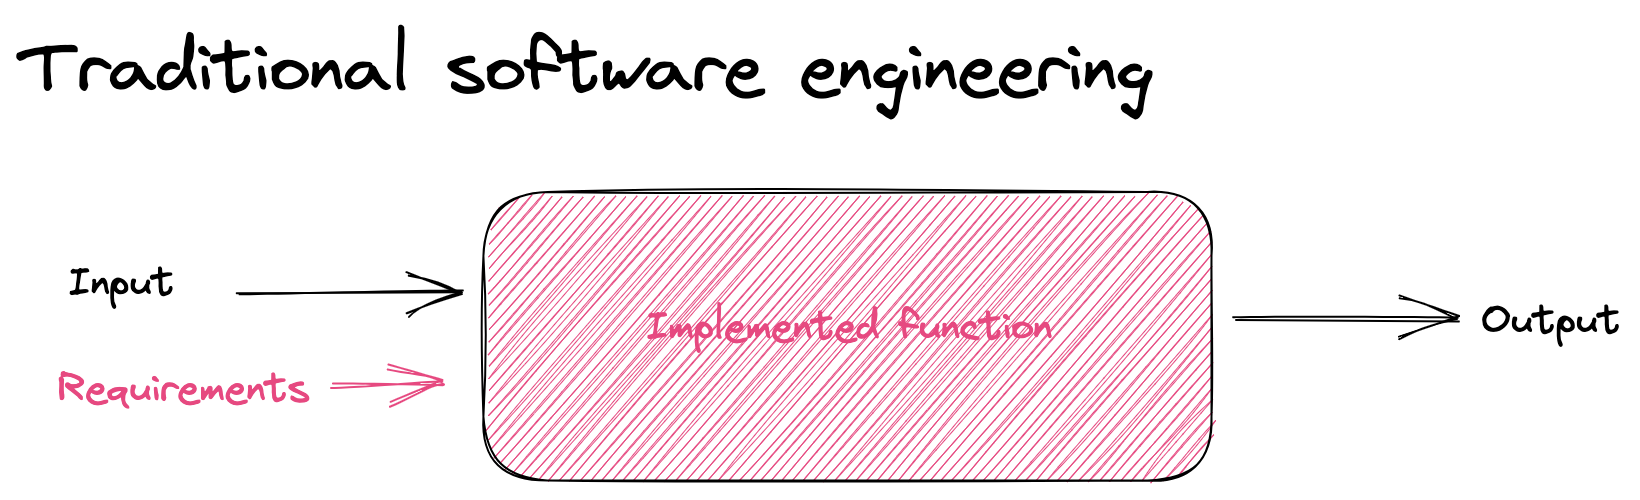 traditional_software_engineering